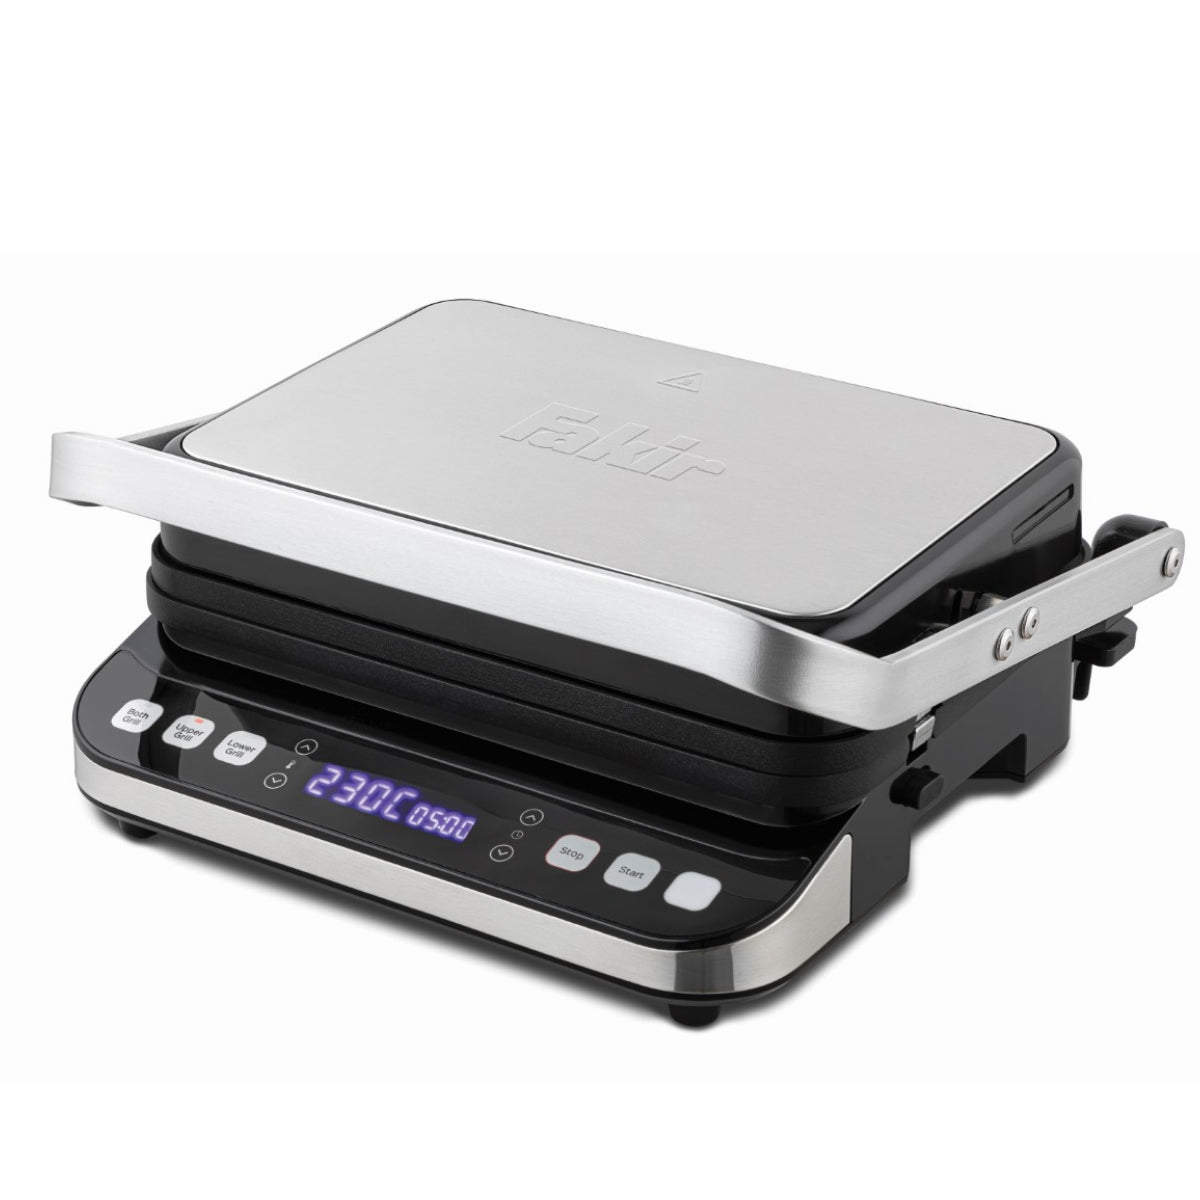 Fakir Grill Expert Elite Grill And Toster,2000W,Touch Screen